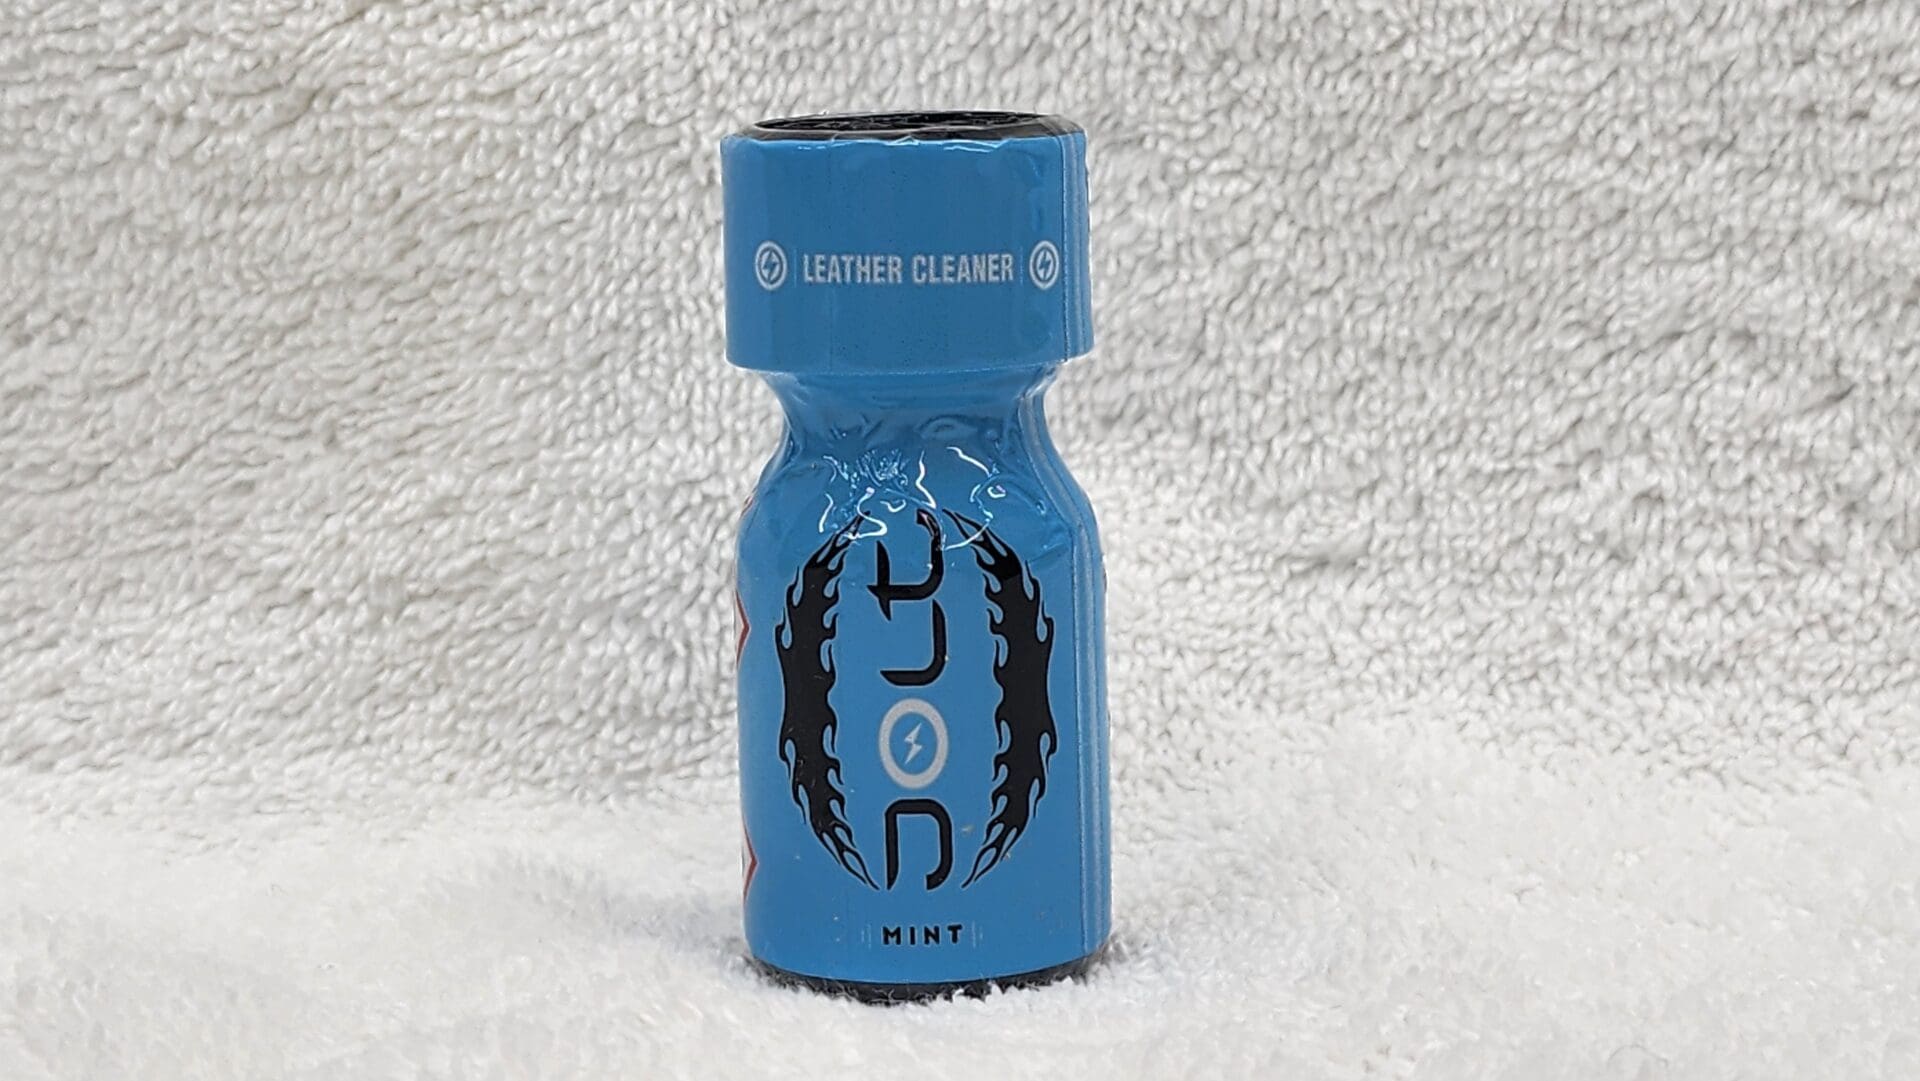 A blue bottle of Jolt Coconut leather cleaner labeled "mint" on a white textured surface.